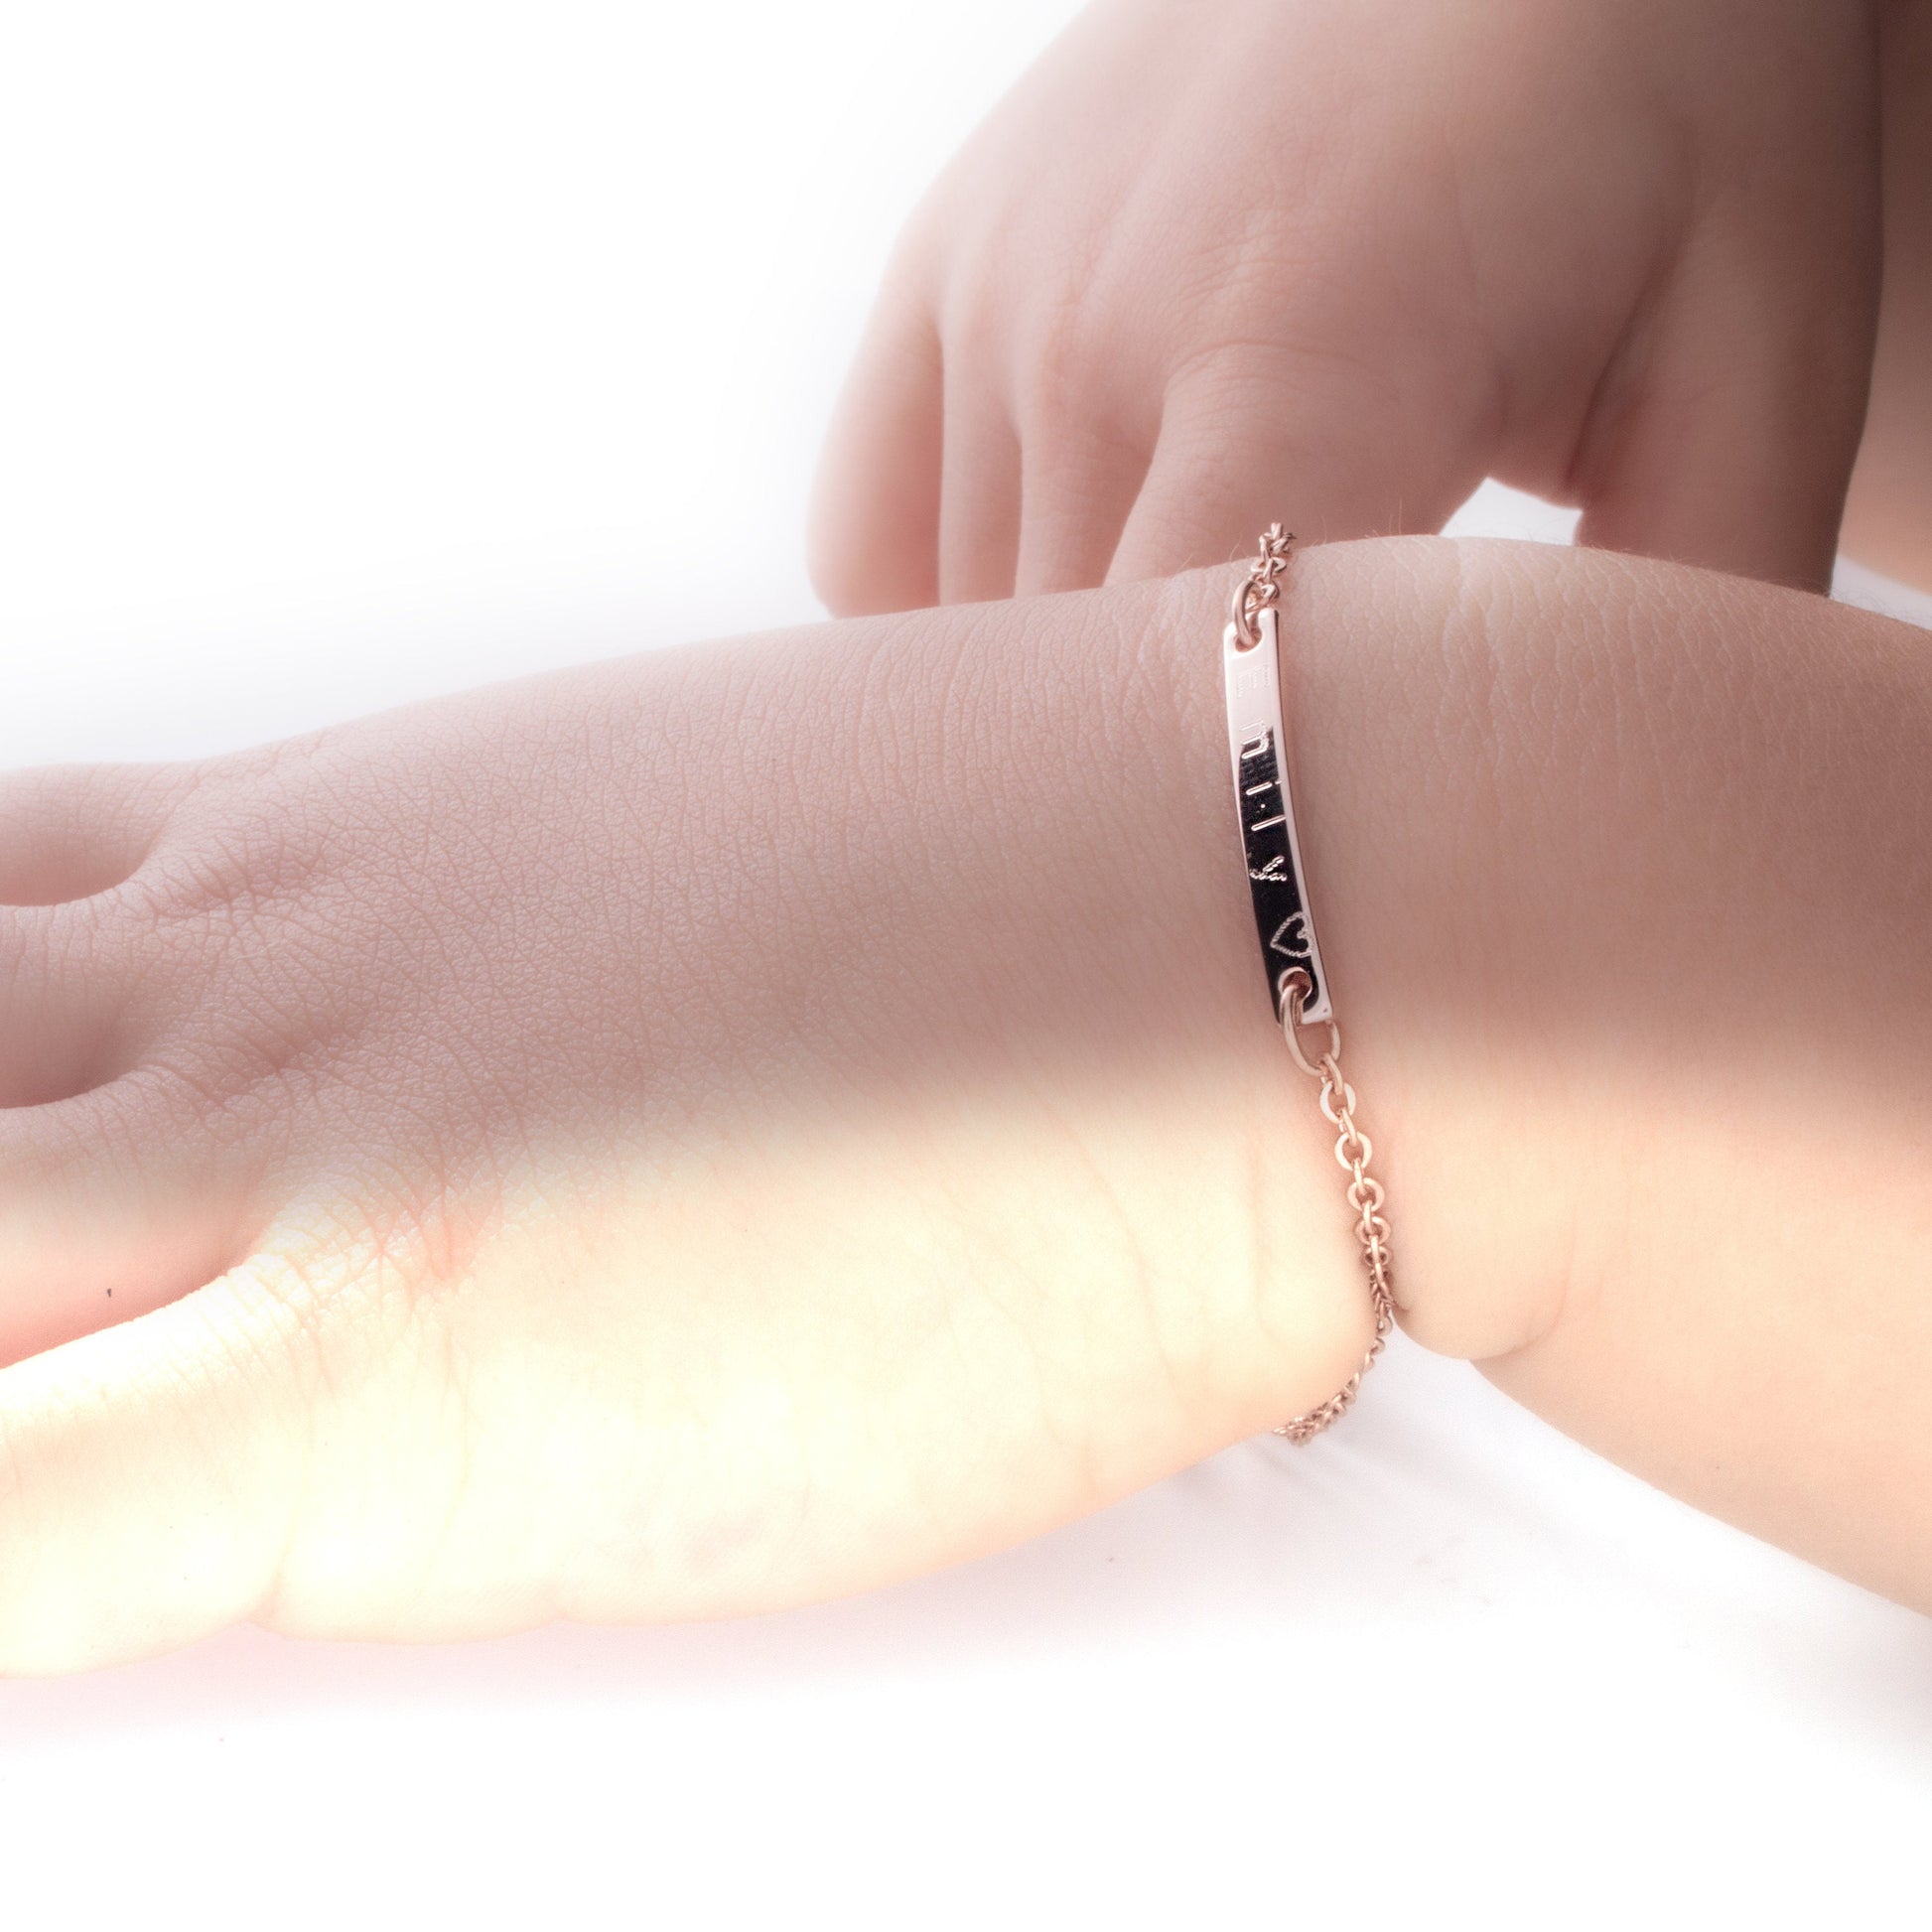 Buy Personalized Baby Name Bracelet in 16K Gold at Petite Boutique